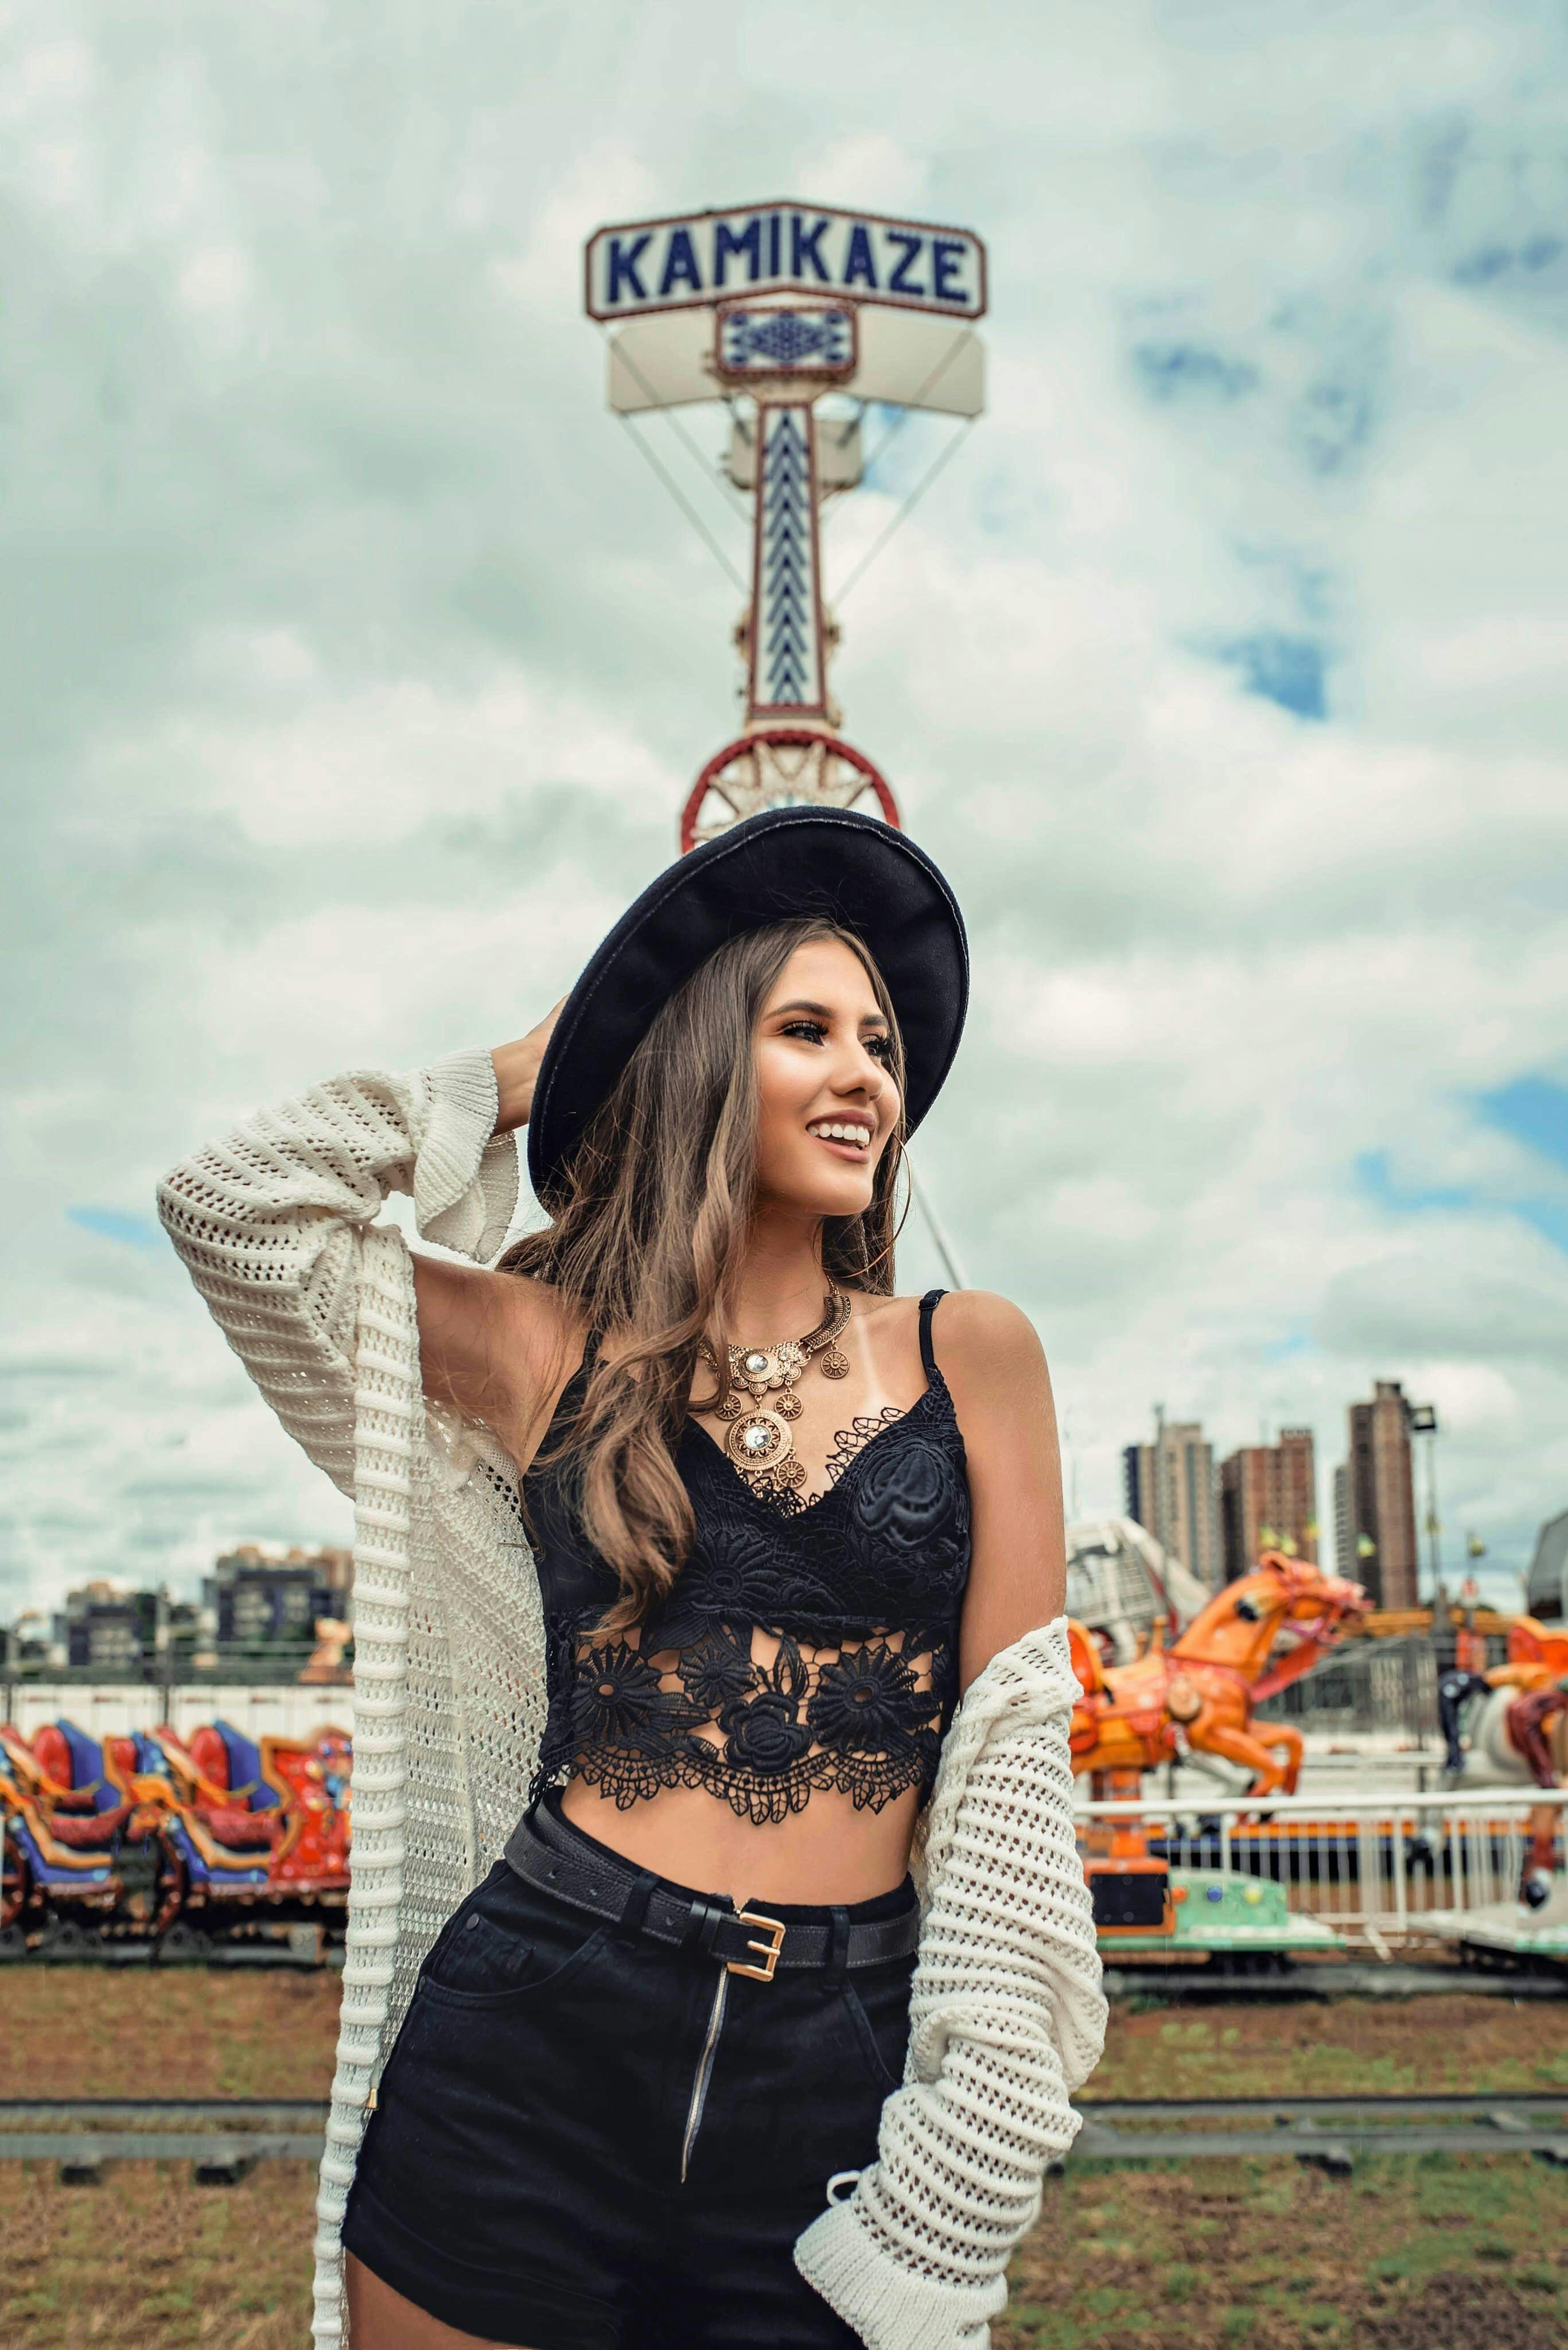 Woman Wearing Black Hat, White Cardigan, and Black Lace Crop Top